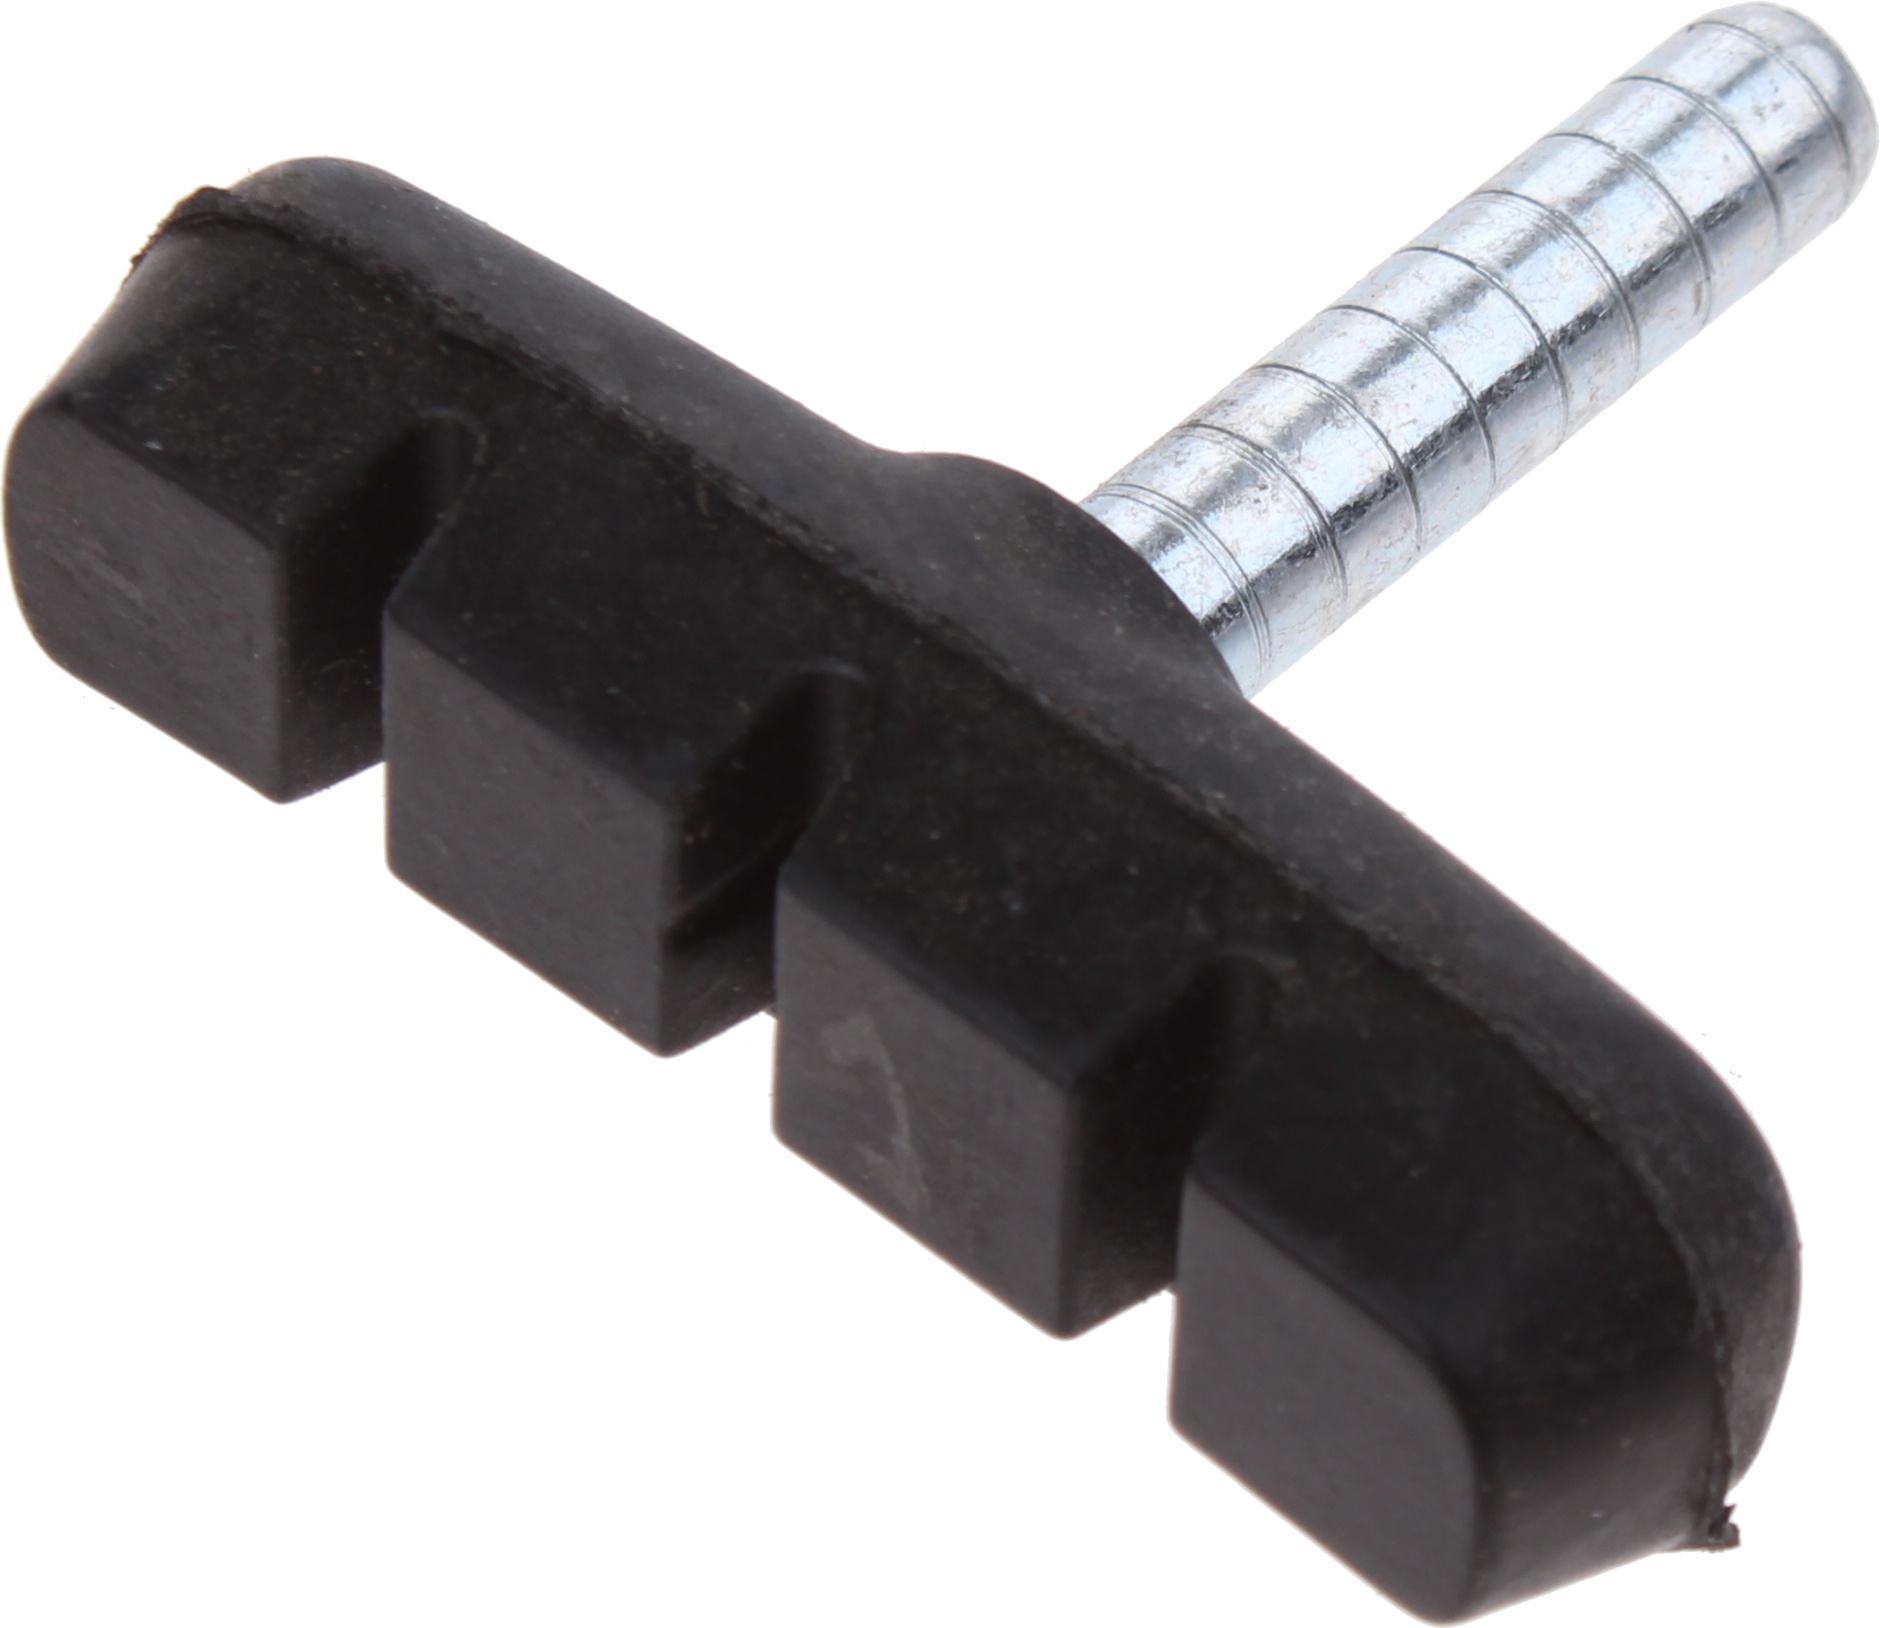 Cycle Tech brake pads cantilever 55 x 17 mm black 4 pieces - Giga-Bikes ...